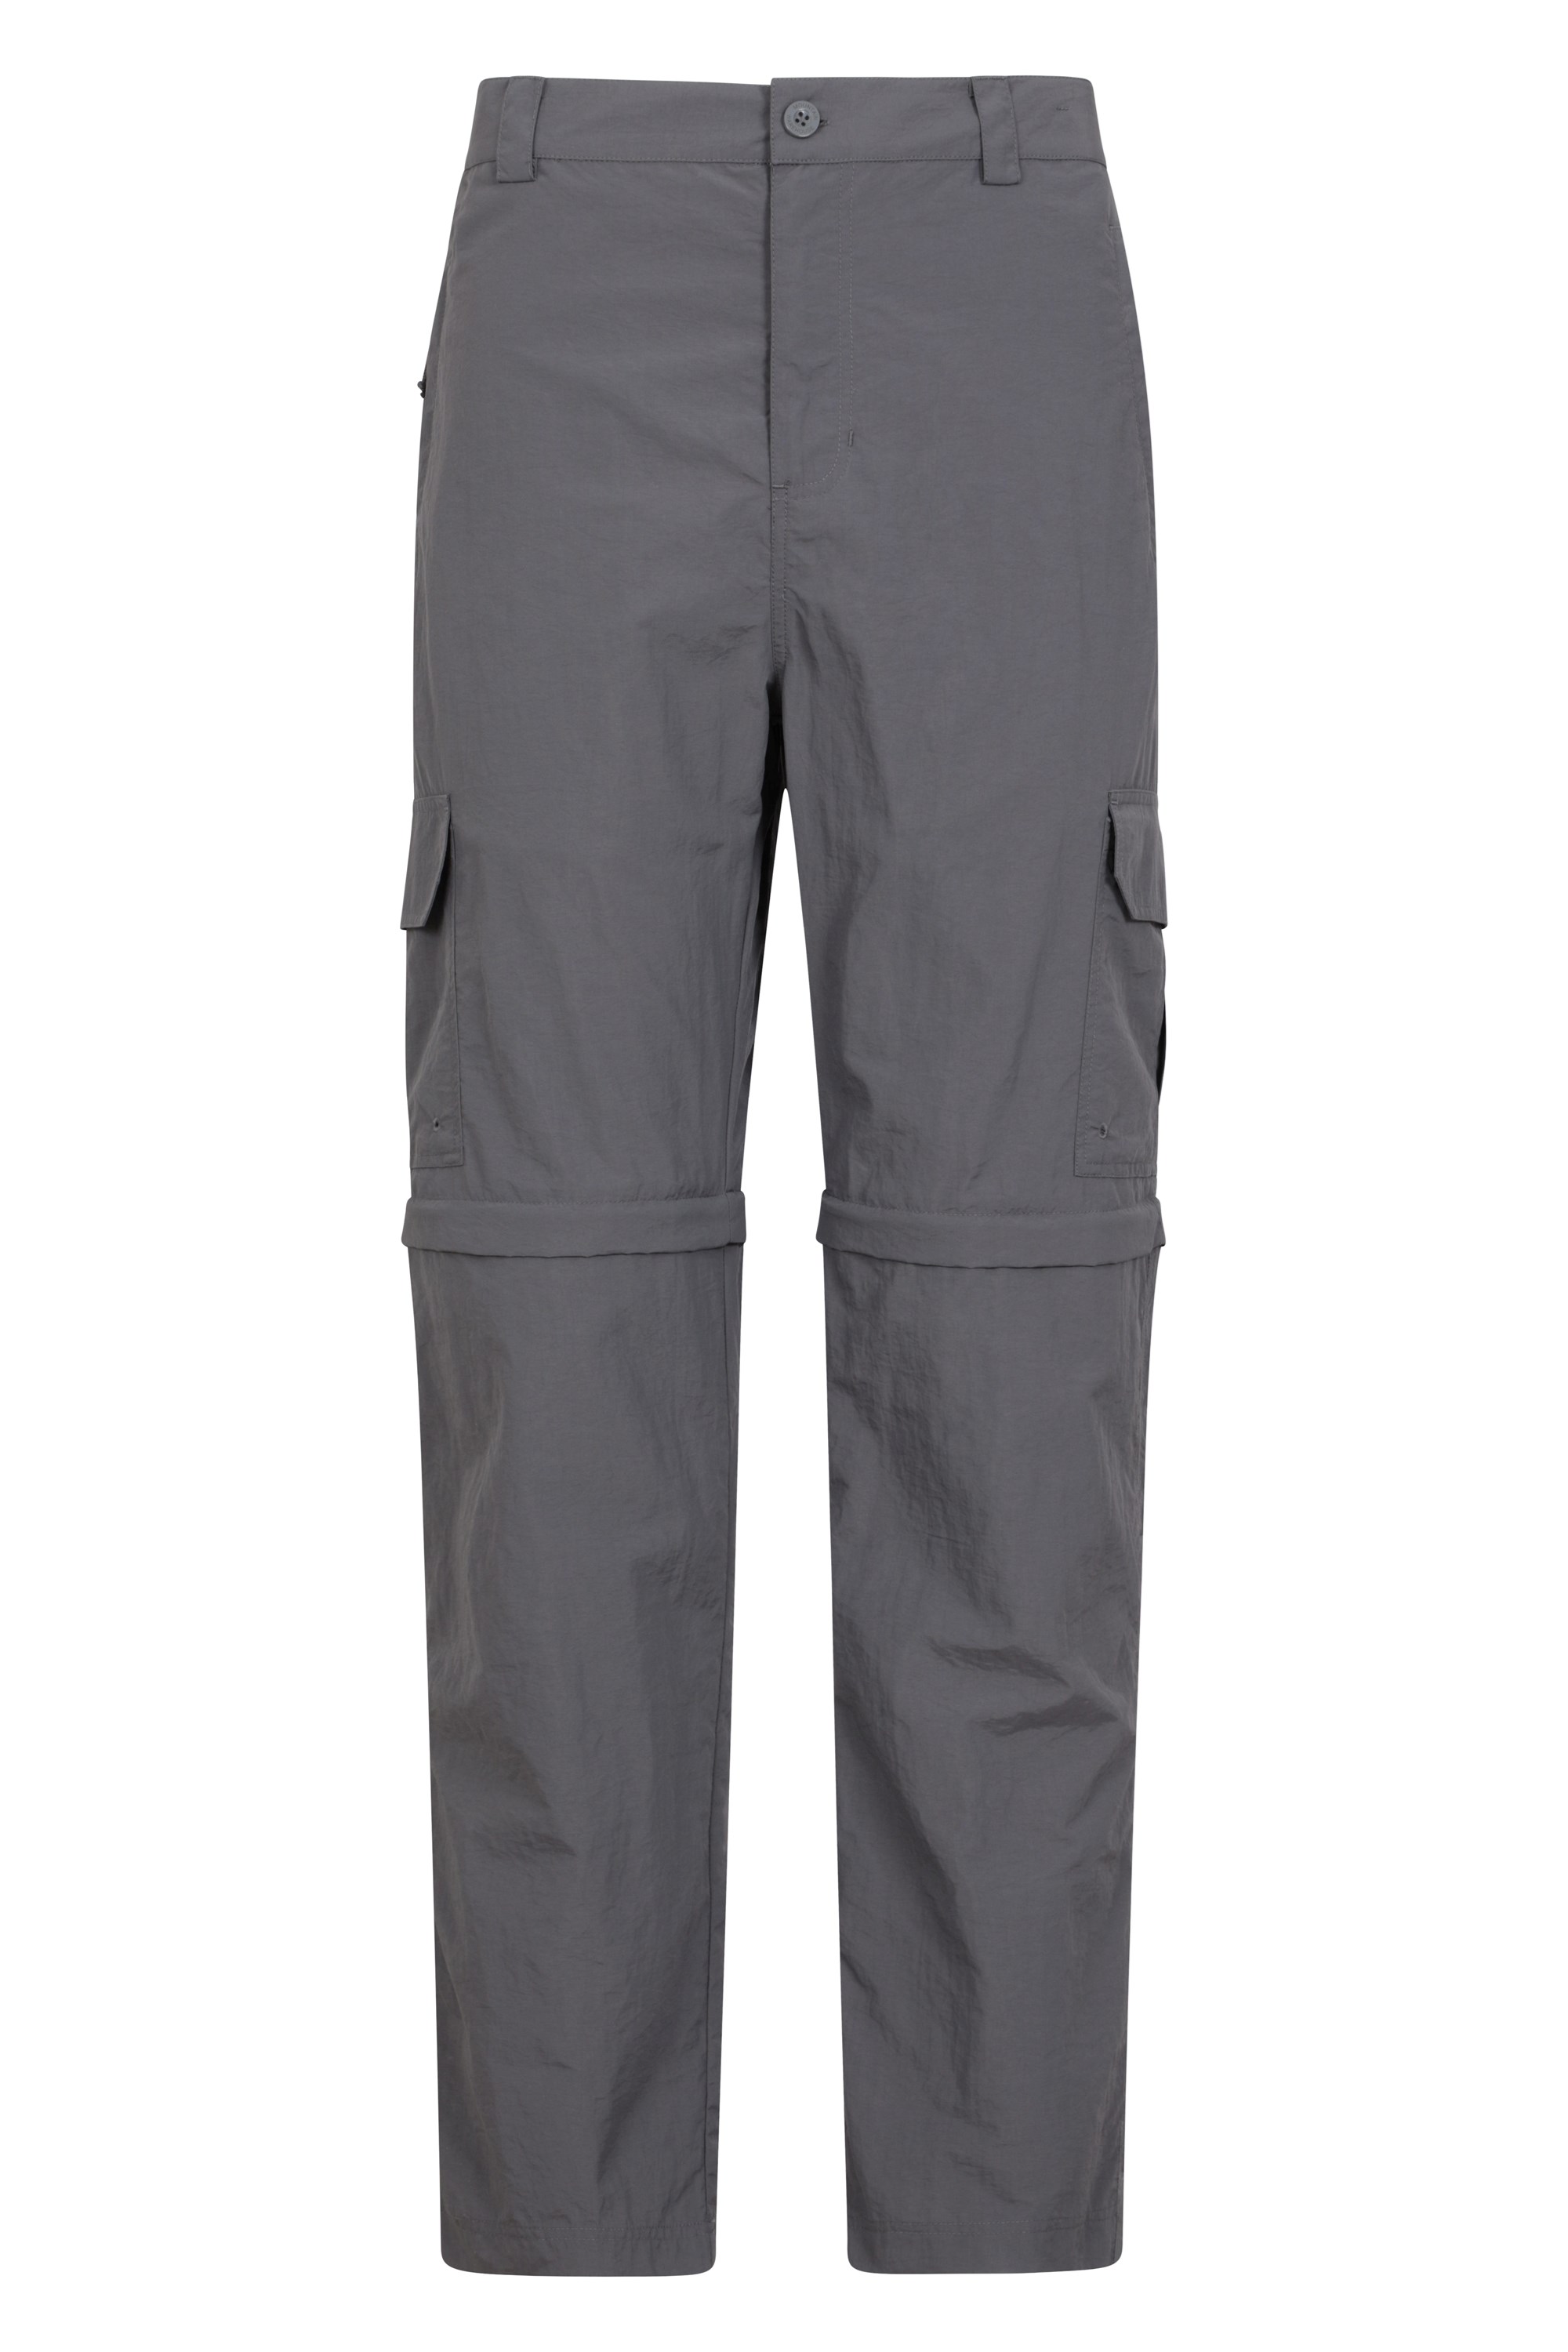 Transition In Motion - Zip-Off Trousers for Men